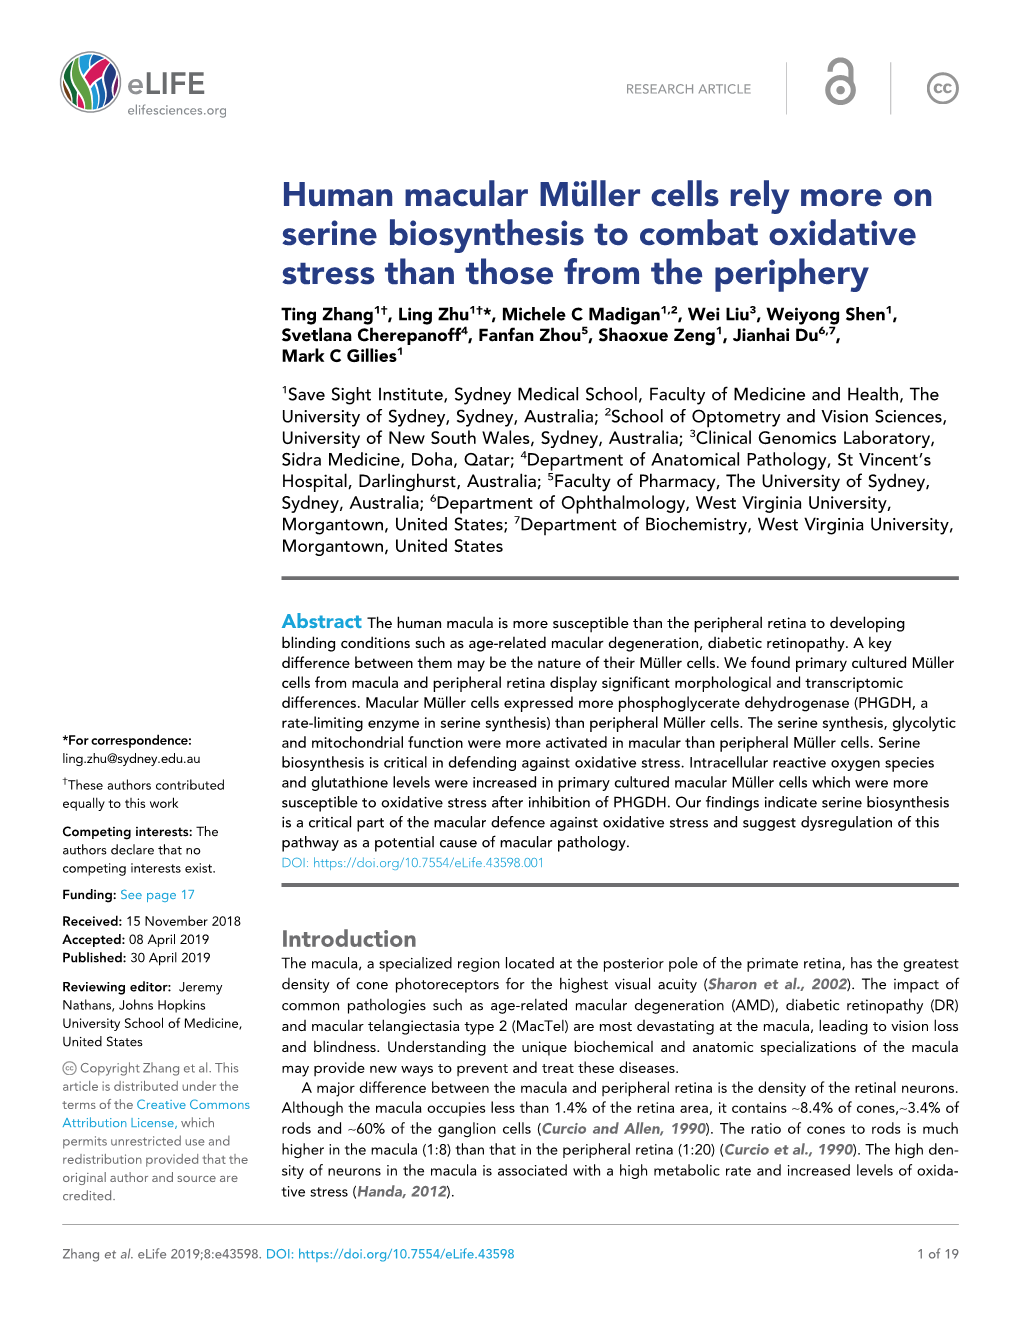 Human Macular Mu¨ Ller Cells Rely More on Serine Biosynthesis To